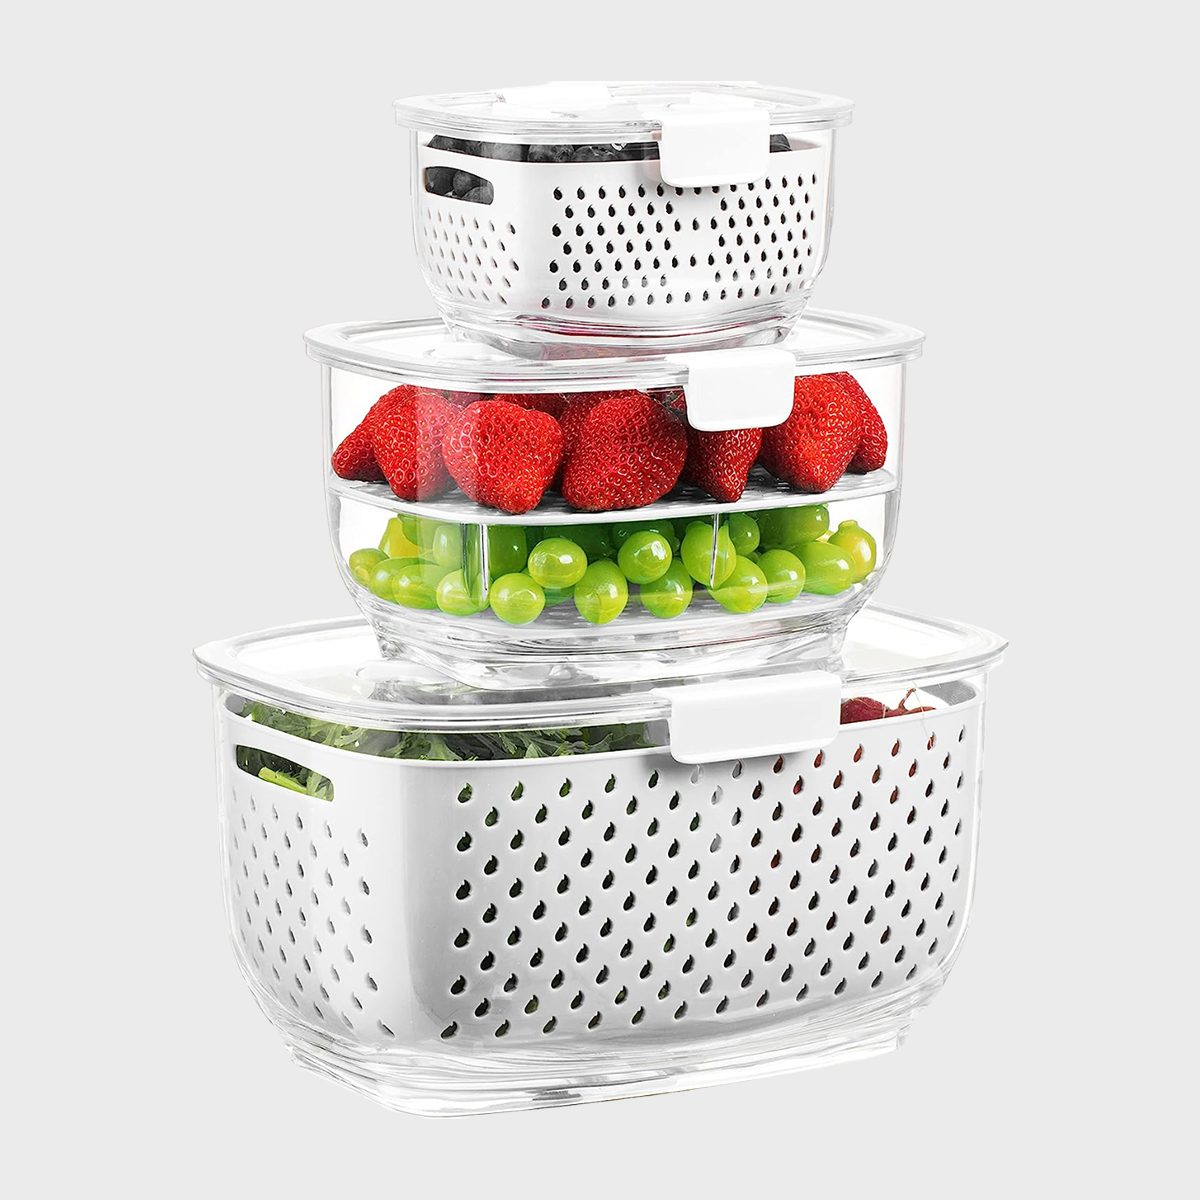 https://www.rd.com/wp-content/uploads/2023/08/Luxear-Fresh-Produce-Storage-Containers_ecomm_via-amazon.com_.jpg?fit=700%2C700